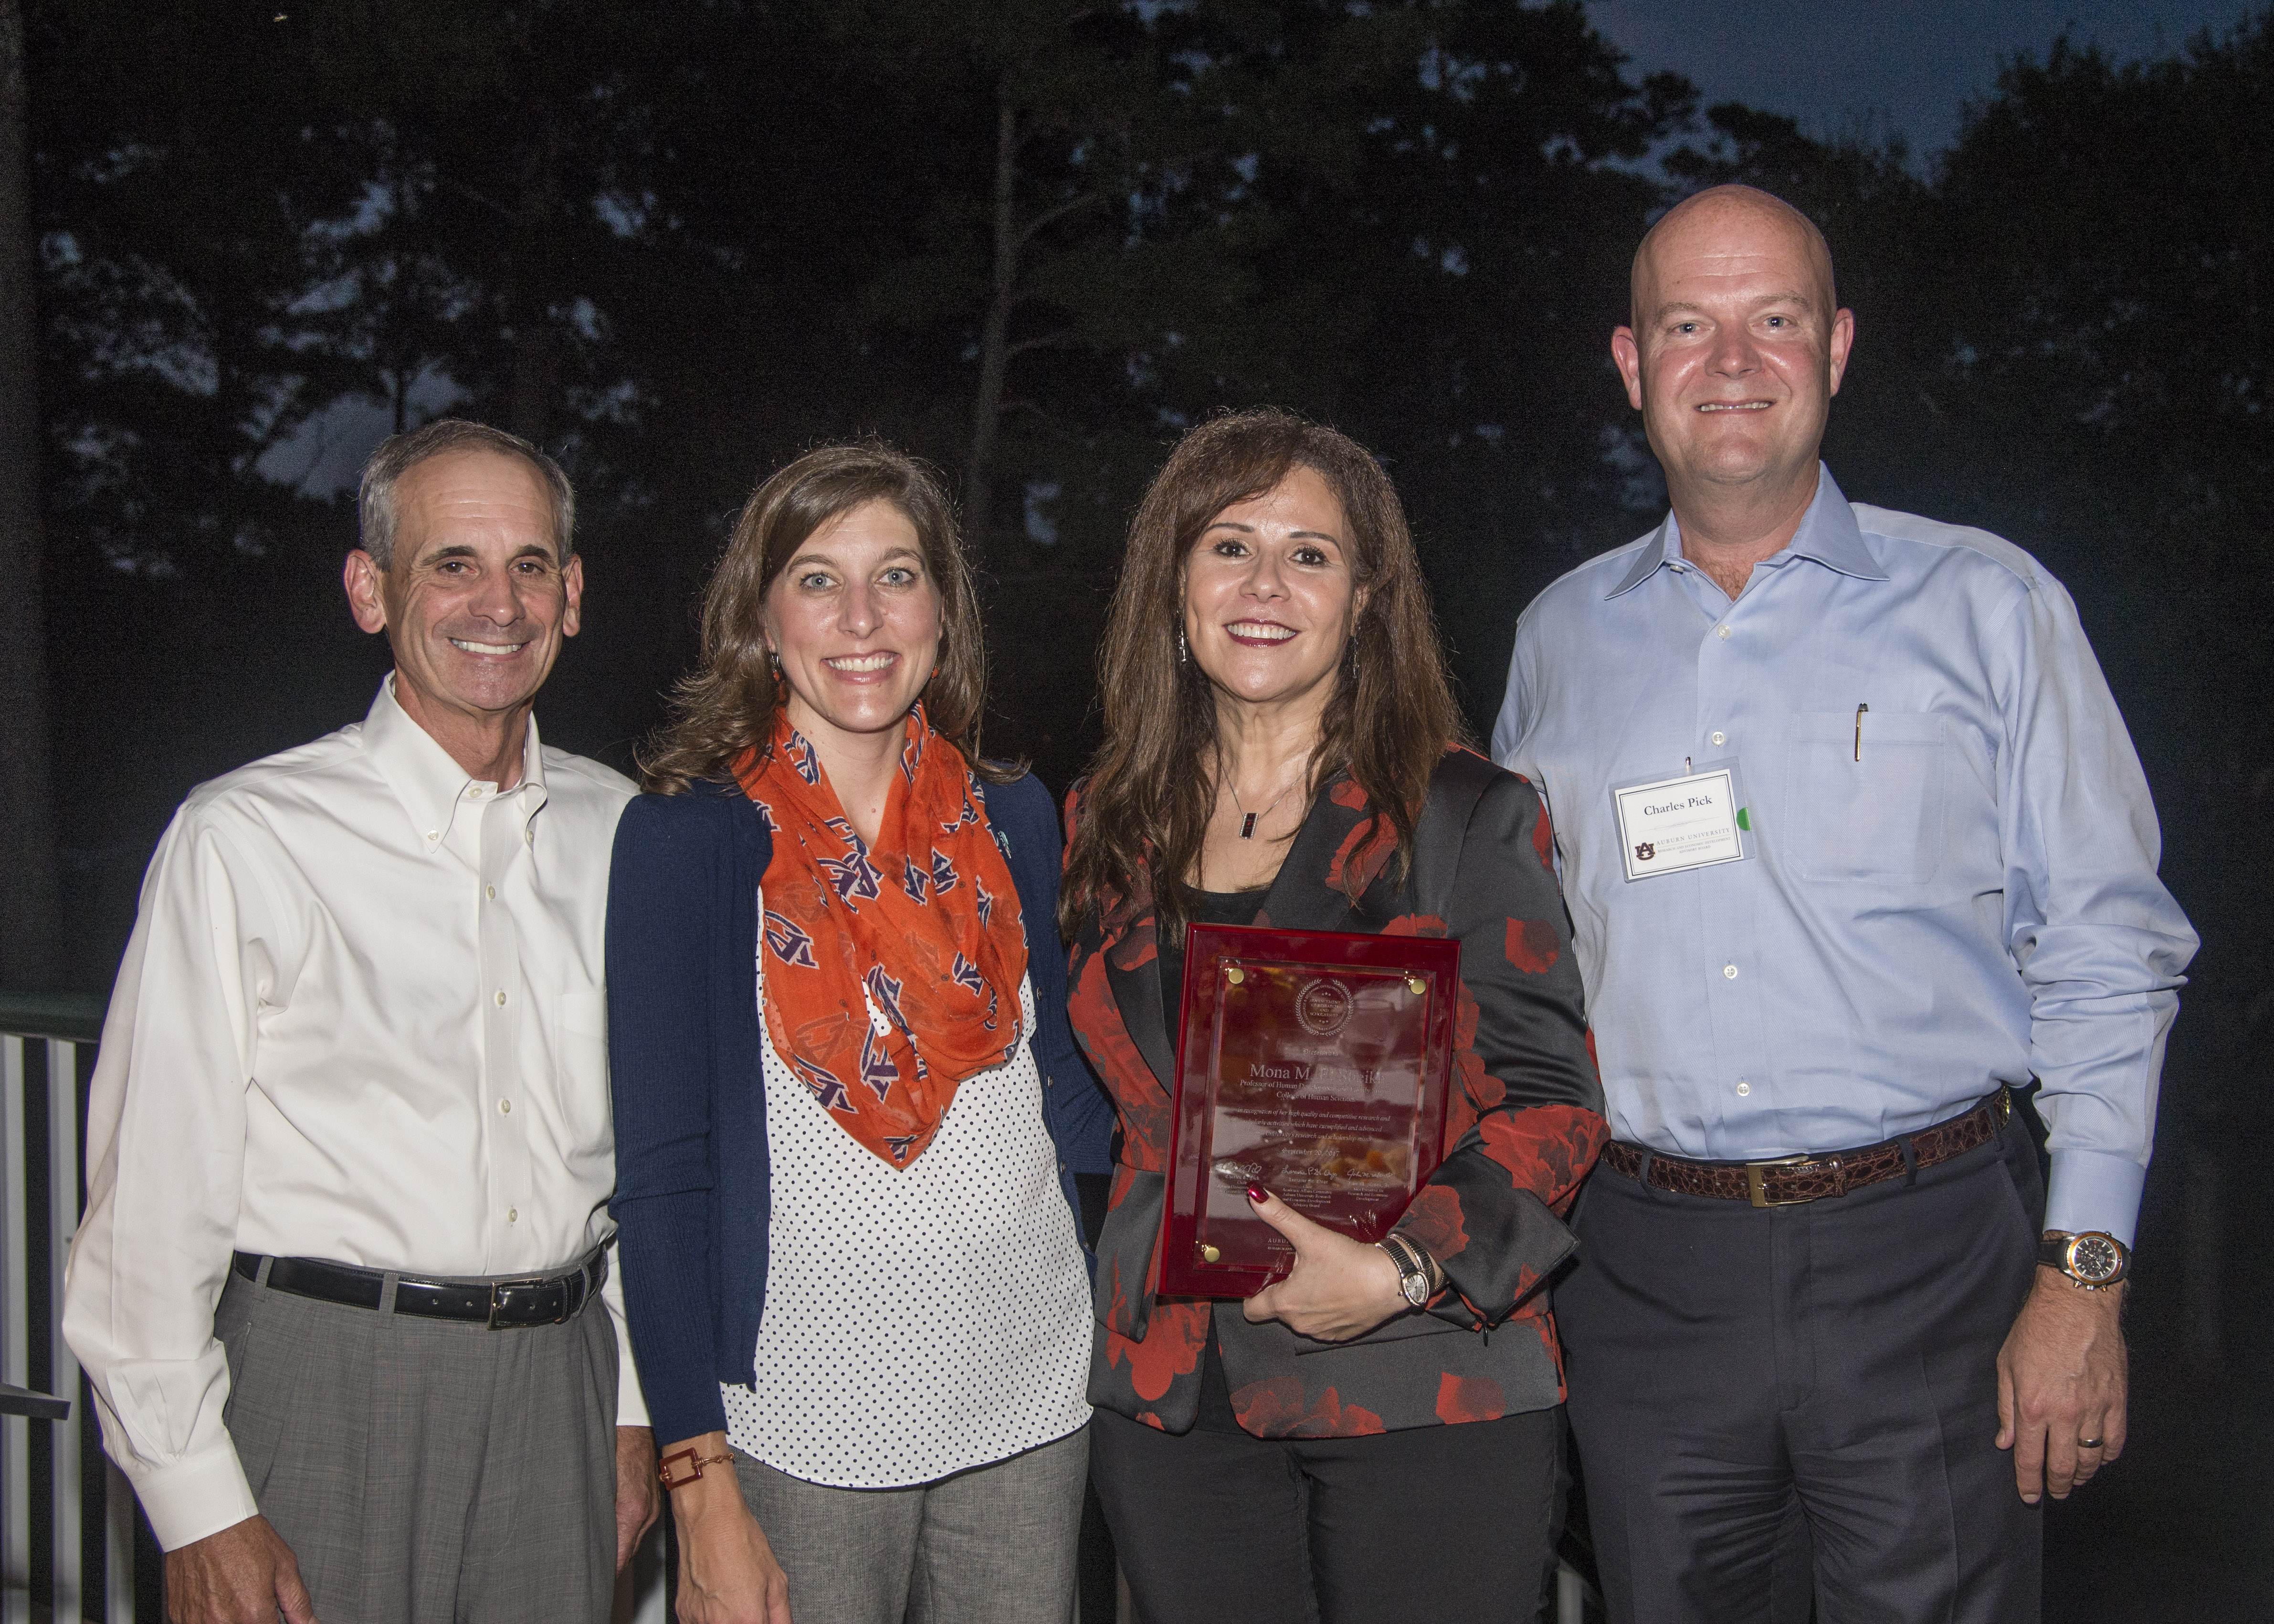 Dr. Mona El-Sheikh holds a plaque recognizing her as recipient of Auburn University's 2017 Research and Economic Development Advisory Board Advancement of Research and Scholarship Achievement Award. Also pictured: Dr. John Mason, vice president for research and economic development; Dr. Lori St. Onge, board member; and Charles Pick, board member.